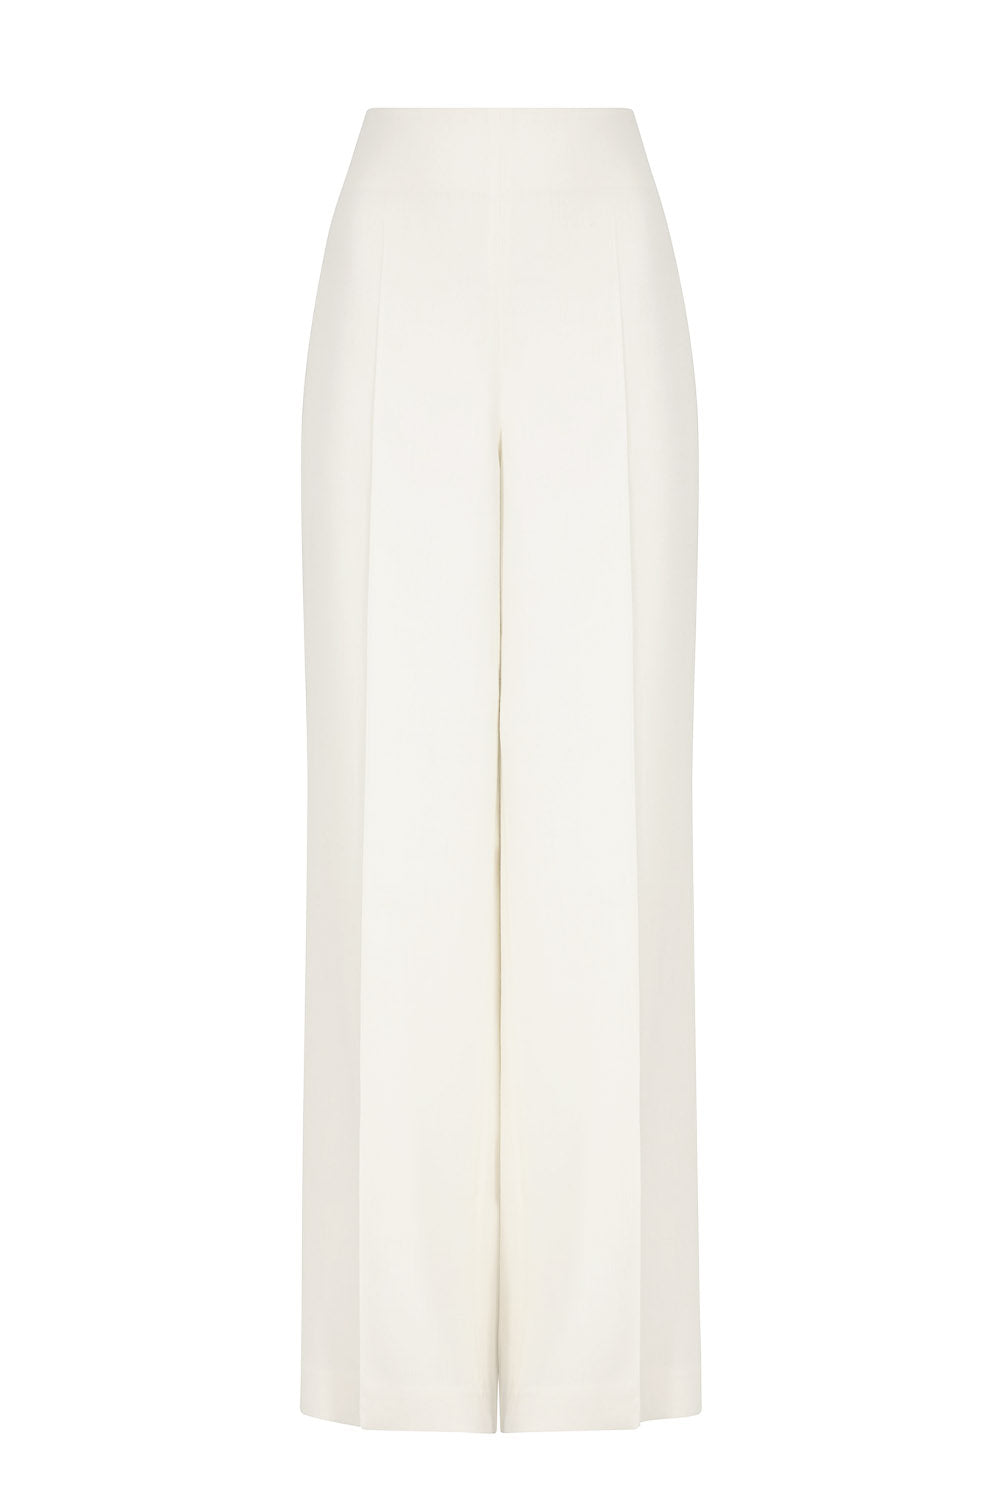 Wide Leg Trousers in Plain Ivory Faille - Paloma